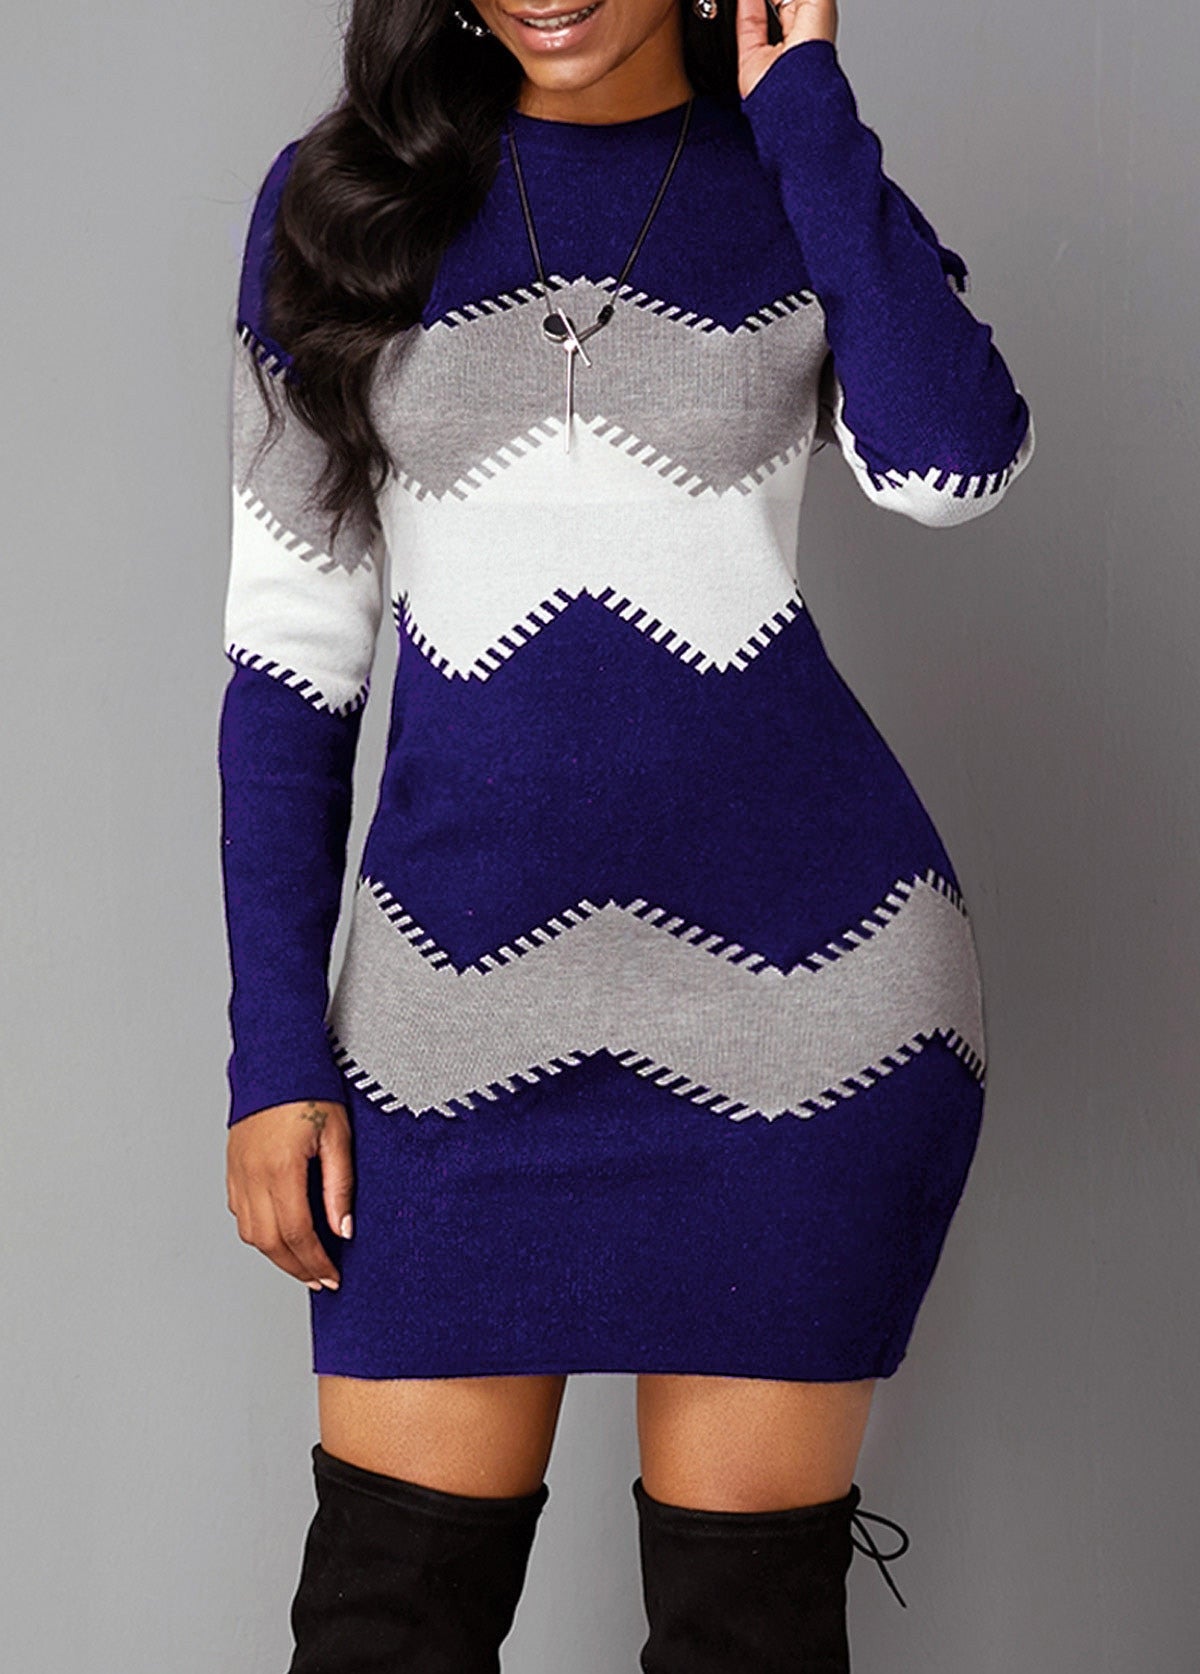 Women Knitted Multi-color Dress Plus Size Spring Autumn Wave Striped Long-sleeved Thin Sweater Dress - WD8153